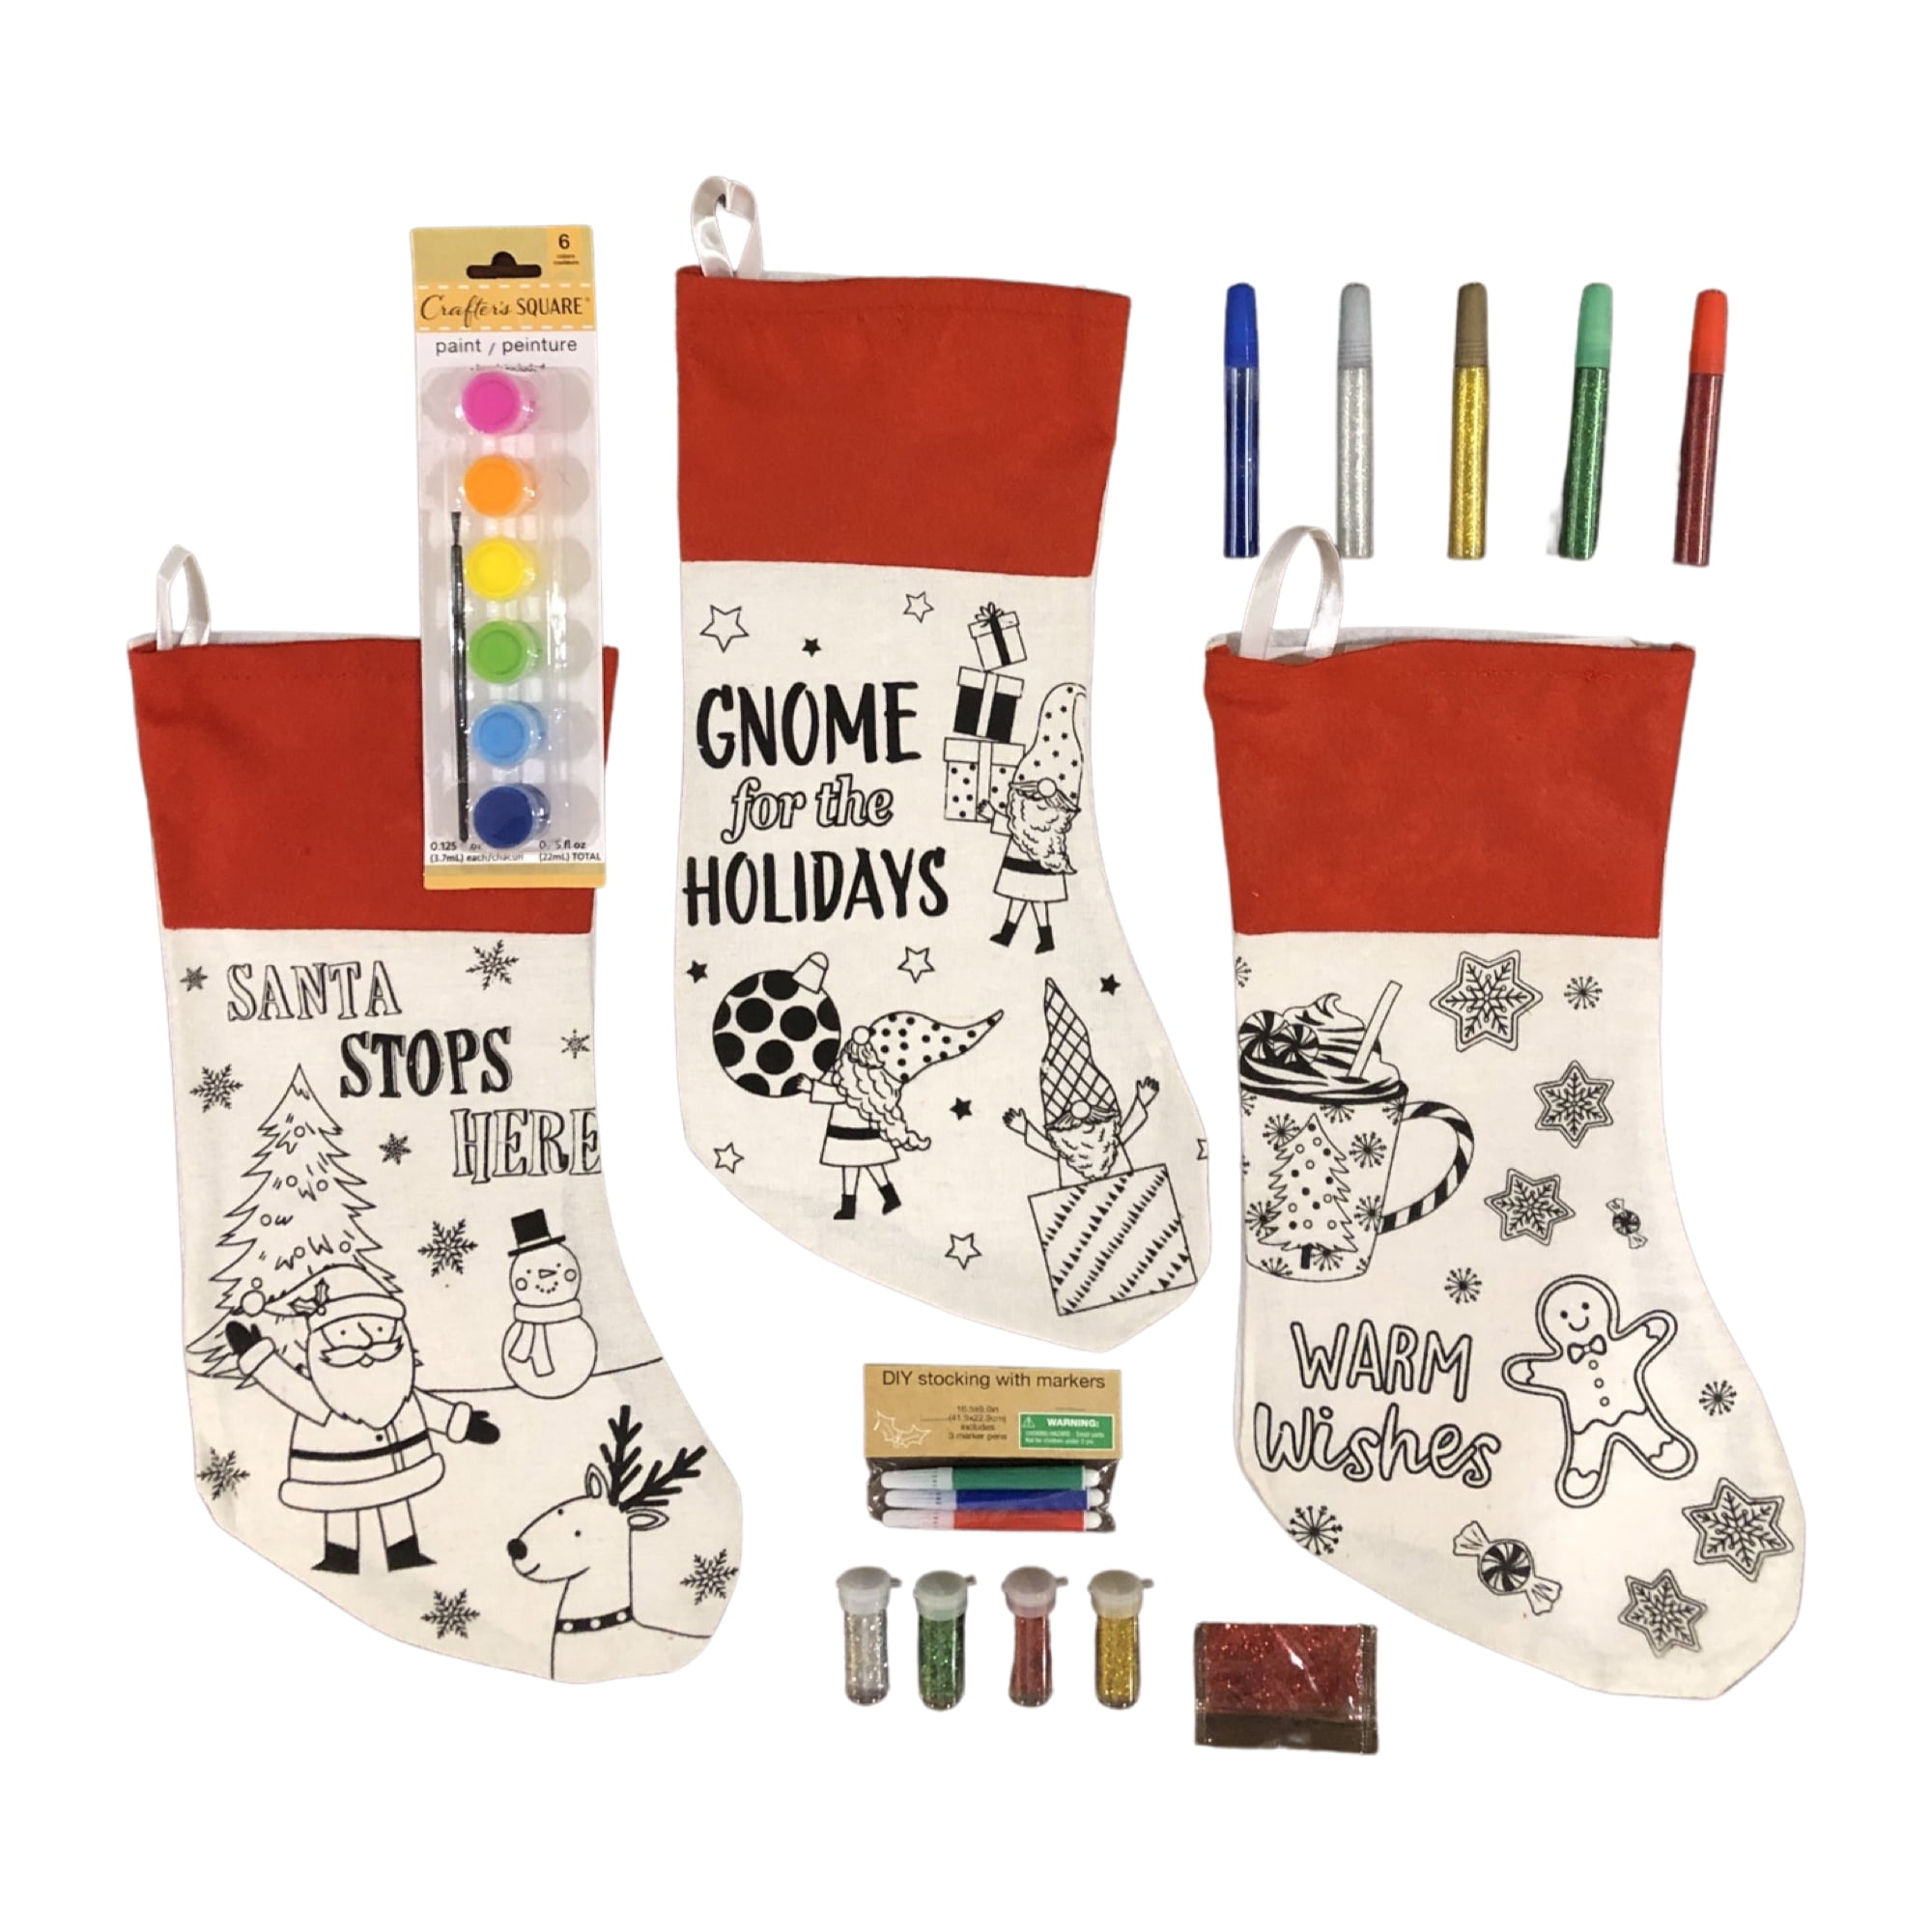 DIY Christmas Stockings Color and Paint Your Own Personalized Stockings,  Gift wrap, Creative Gift for Kids, Family, Holiday - Santa Claus, Reindeer